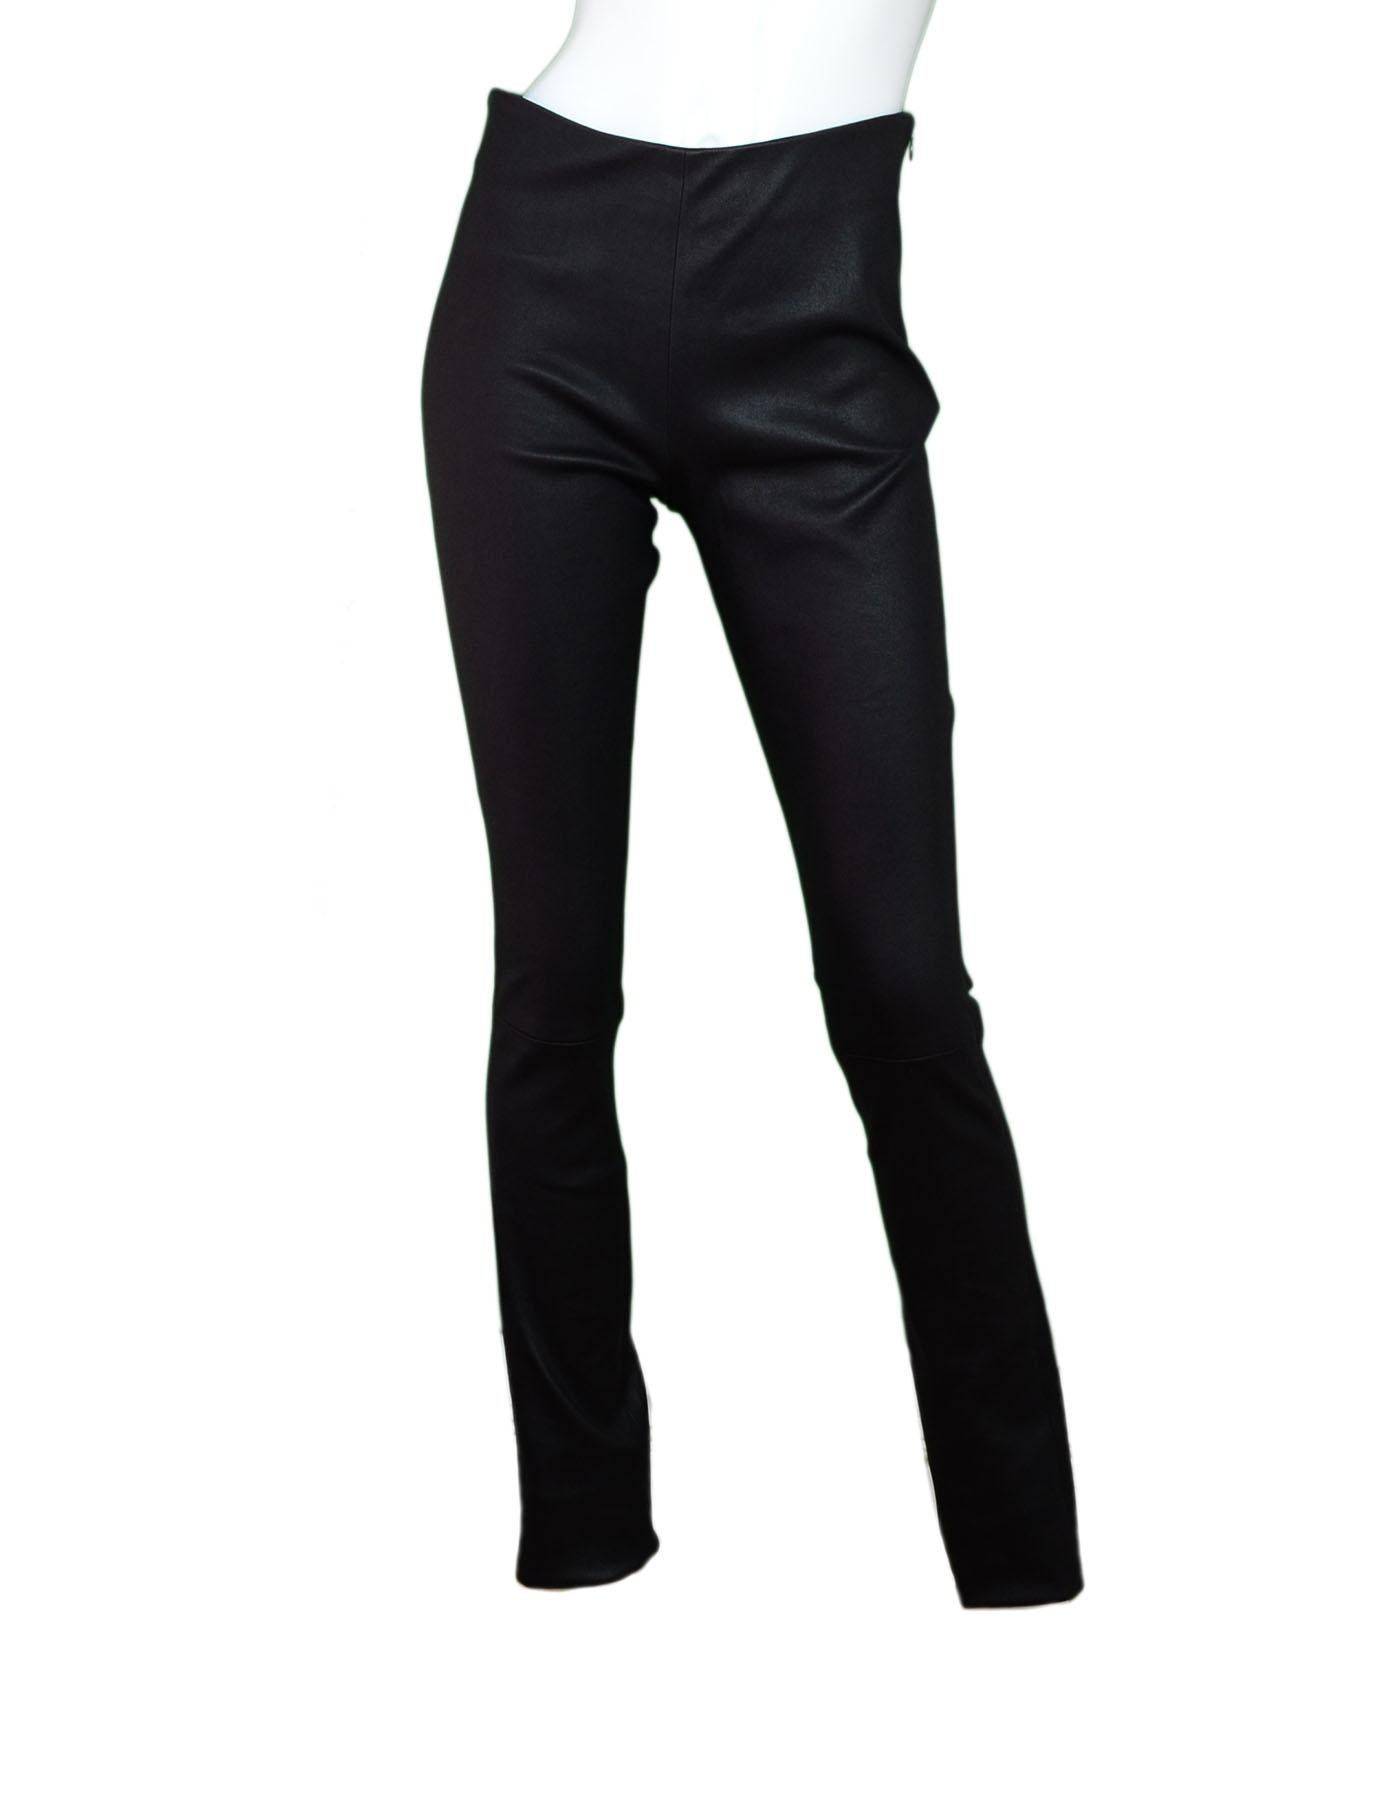 Cushnie Et Ochs Black Leather Leggings Sz 10 NWT

Made In: USA
Color: Black
Composition: 100% leather
Closure/Opening: Hidden side zip closure
Exterior Pockets: None
Overall Condition: Excellent pre-owned condition - NWT

Marked Size: US 10
Waist: